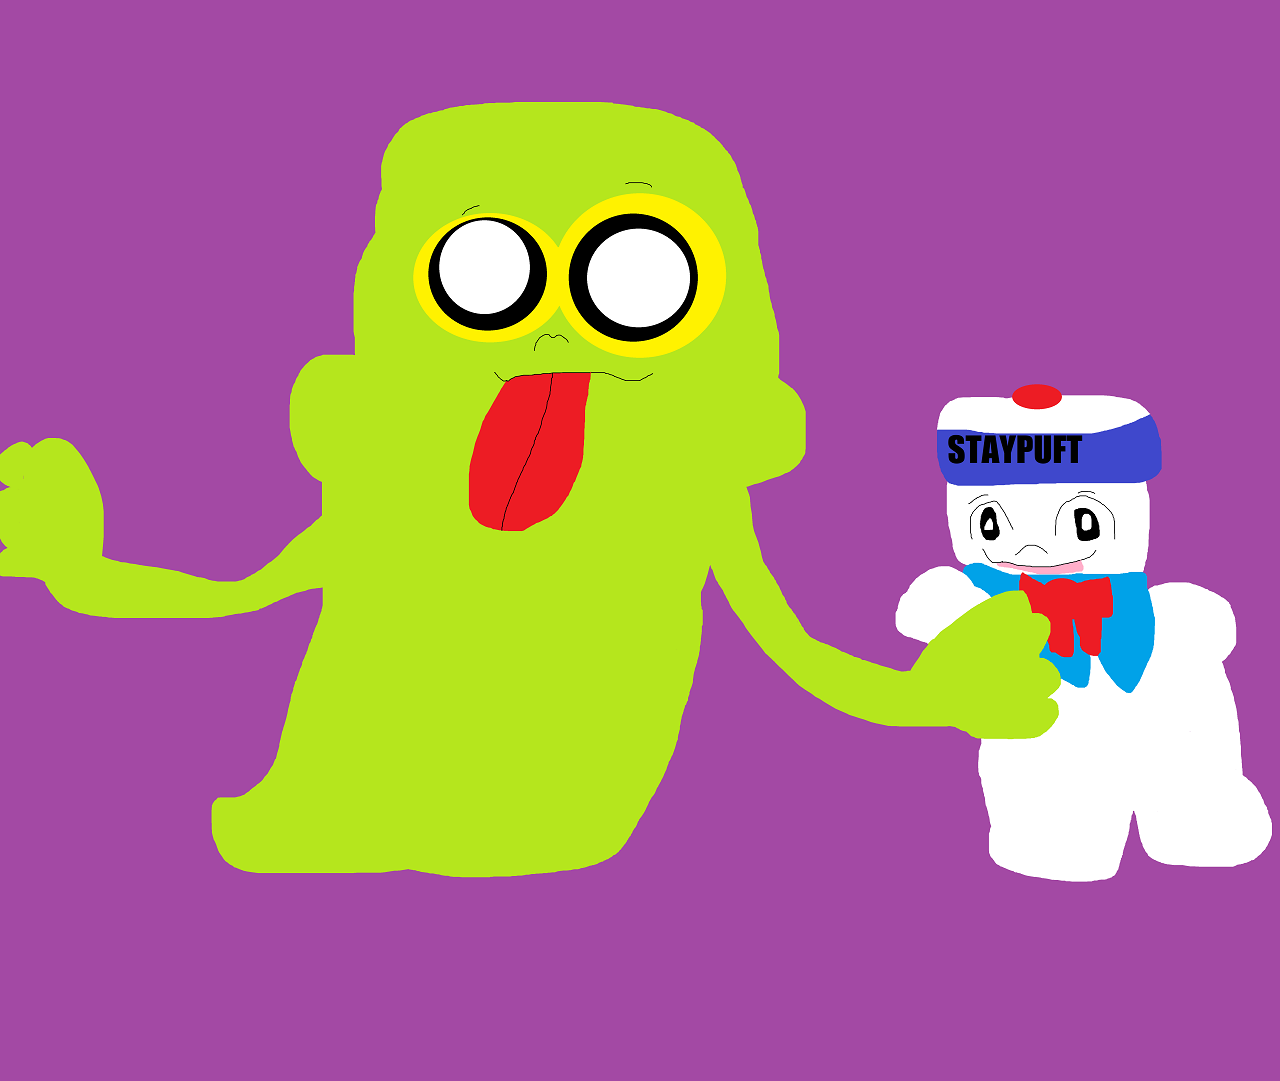 Cute Slimer With Staypuft Plushie^^ by Falconlobo